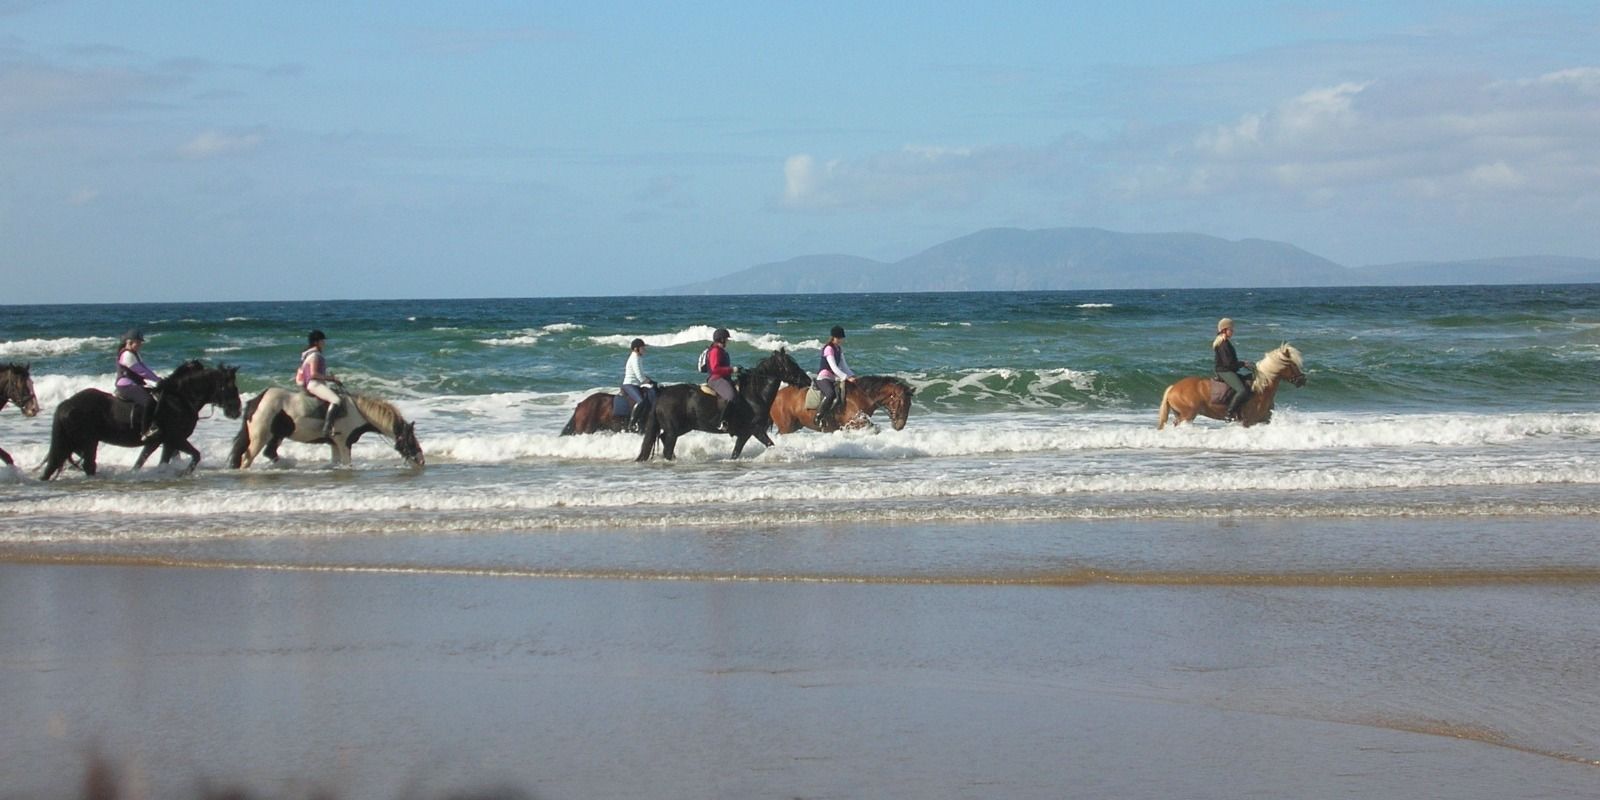 Riders in the surf